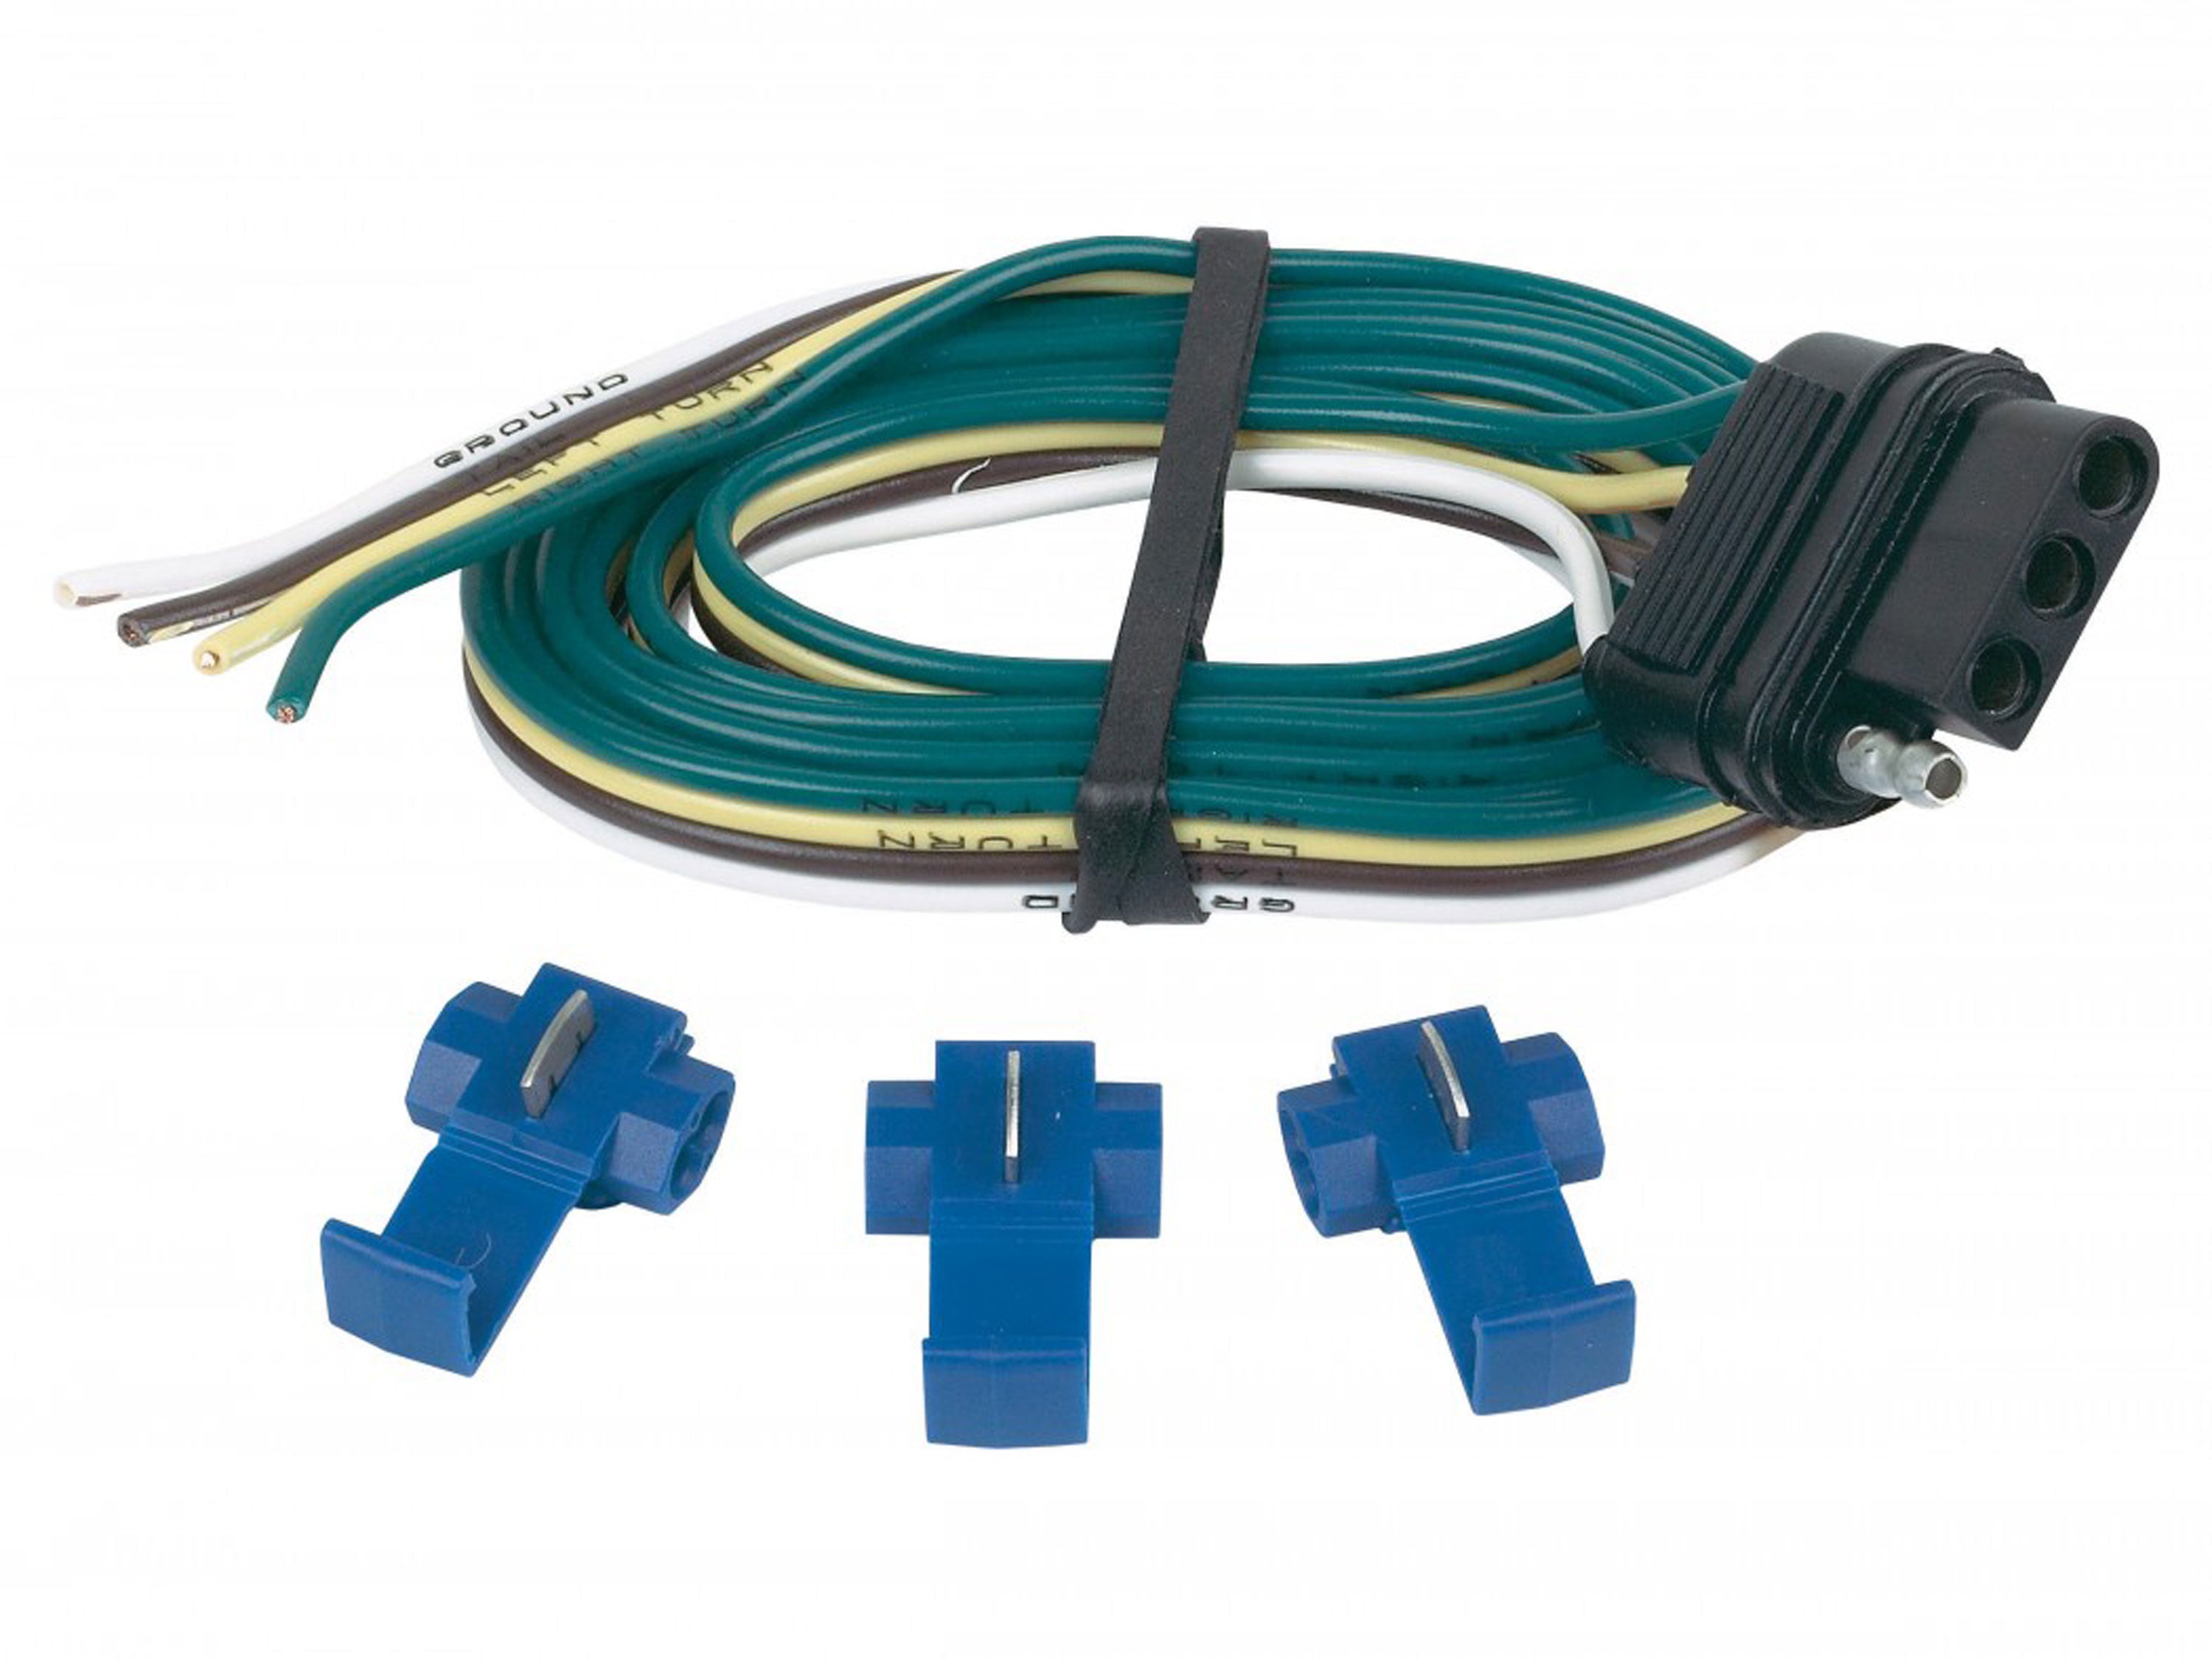 Hopkins 48025 4 Flat Vehicle Side with Splices - 48"